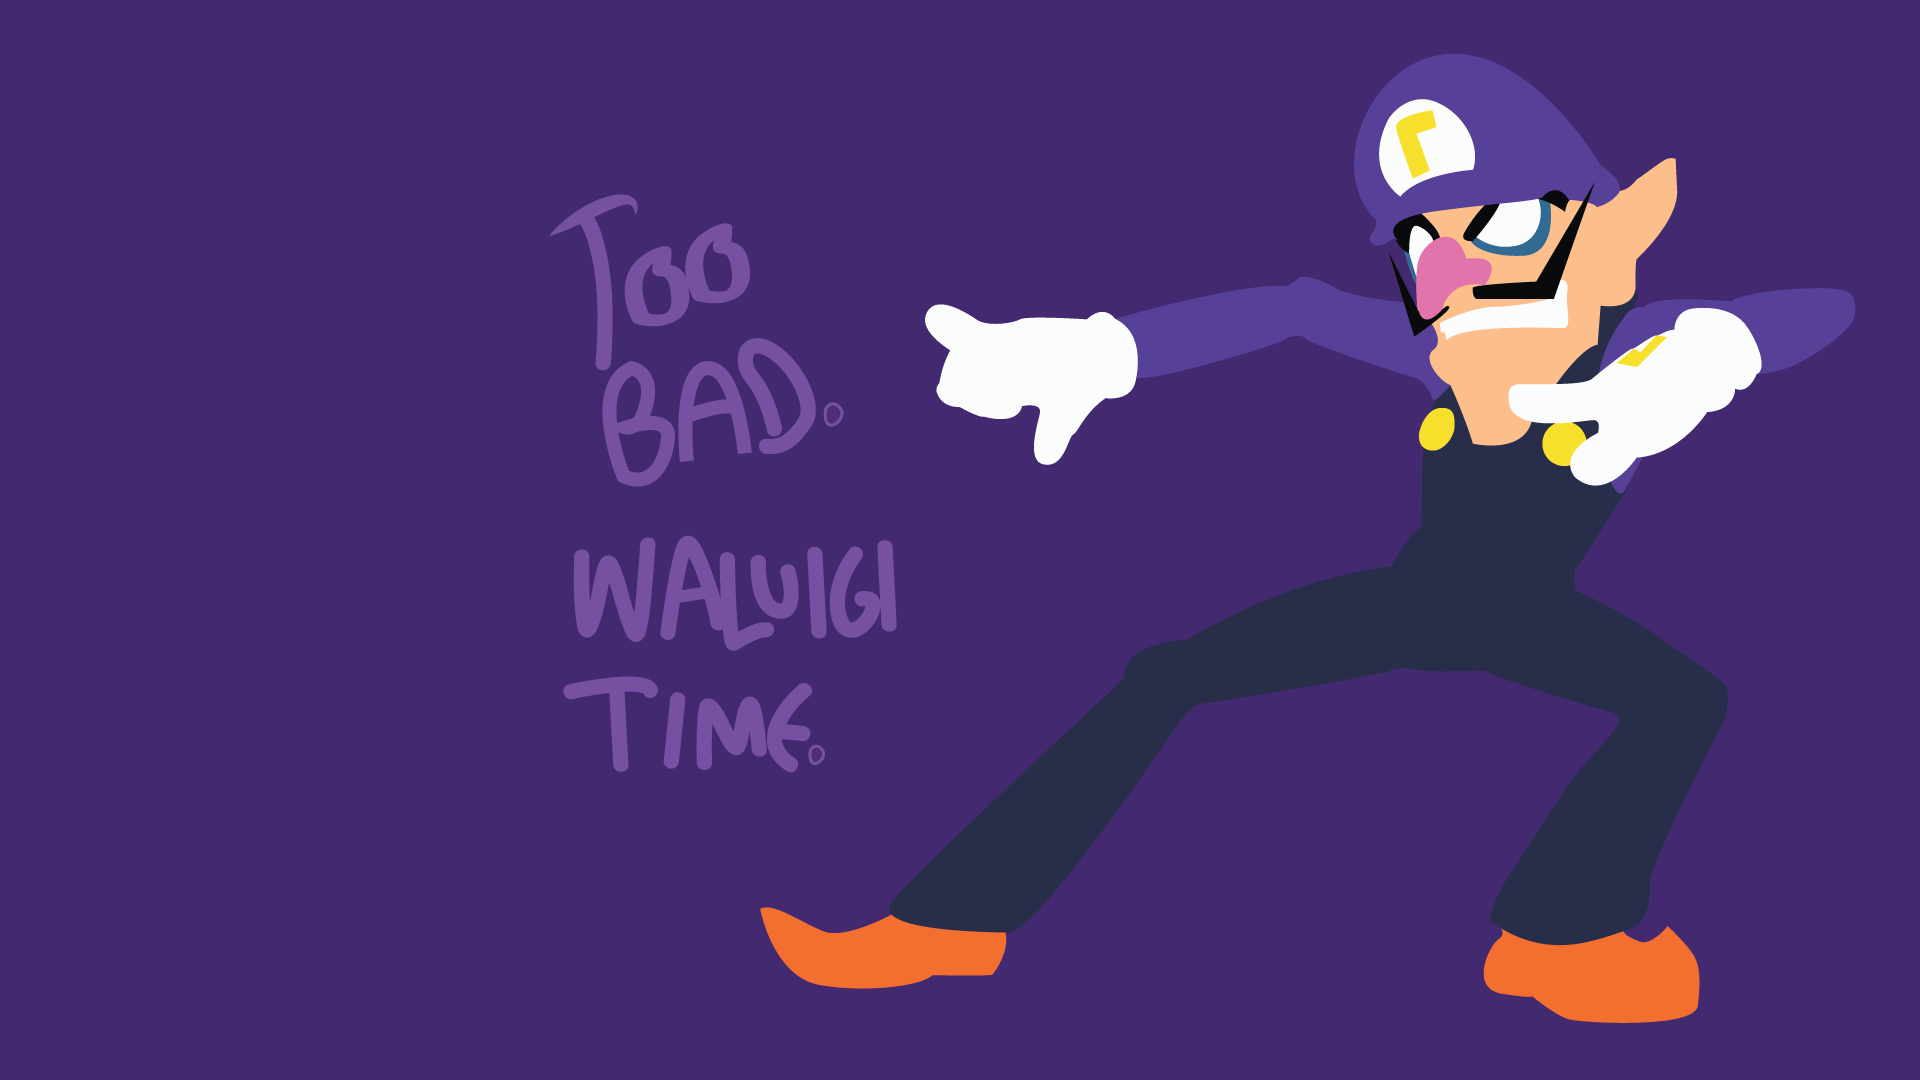 Toobad.png, the encyclopedia of everything Mario